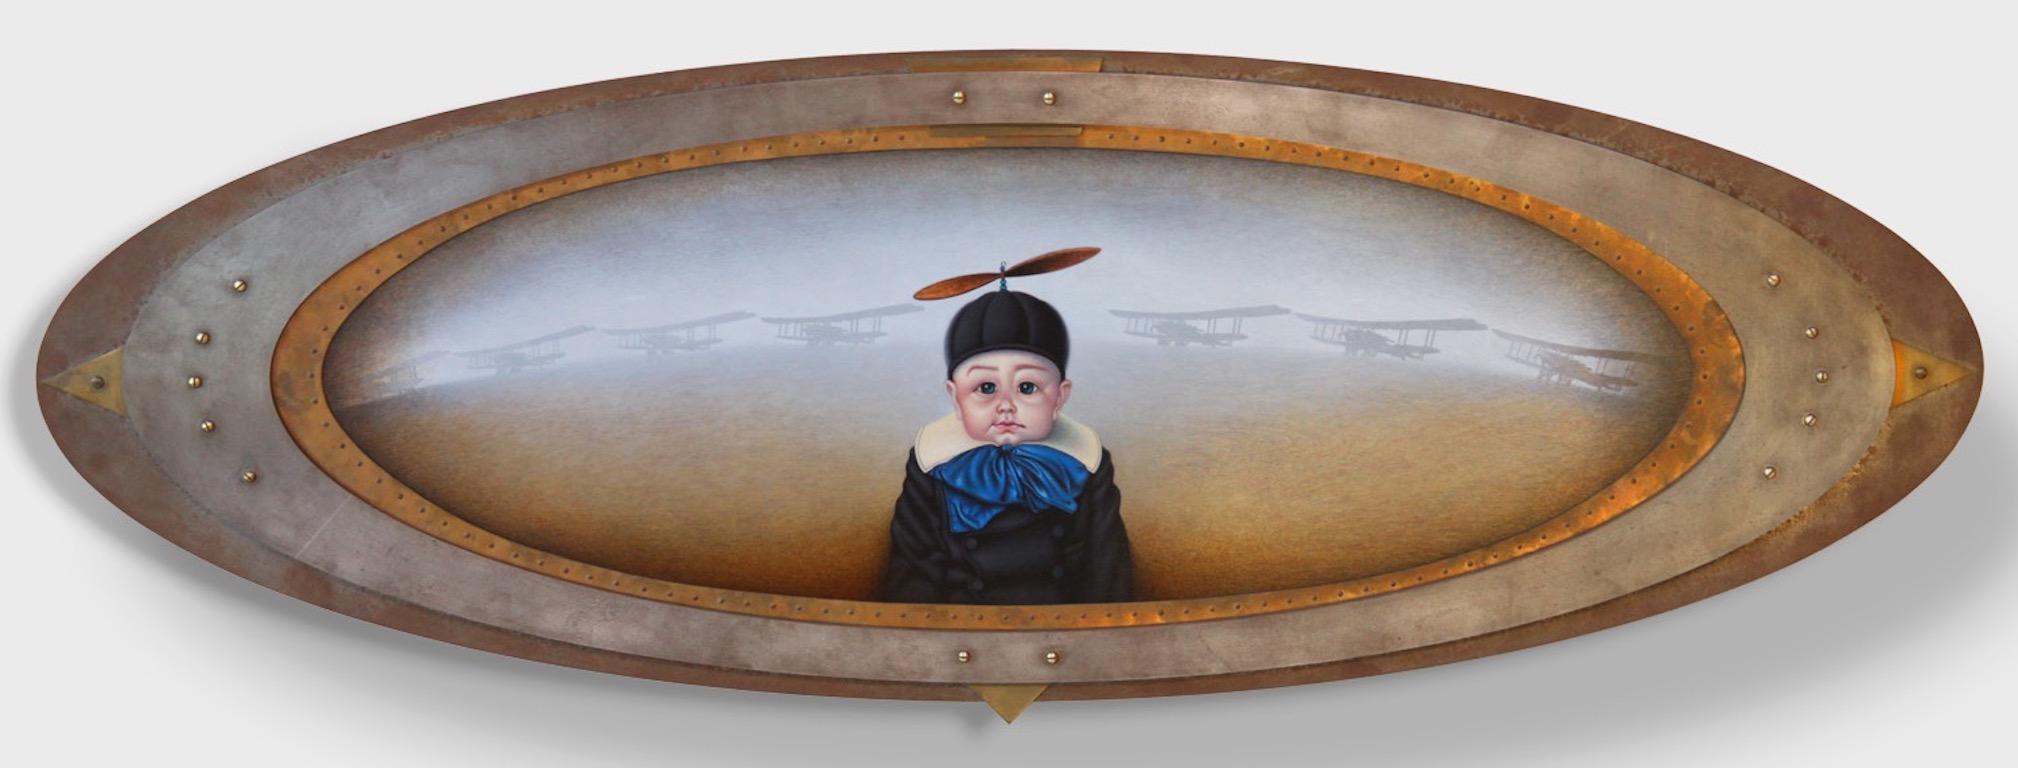 A 14” x 40” x 2” Magical Realism Acrylic Portrait Painting executed on Wood Panel with Bronze by artist Christopher Polentz. A certificate of authenticity will accompany the piece upon its purchase or delivery.

Chris Polentz graduated from Art